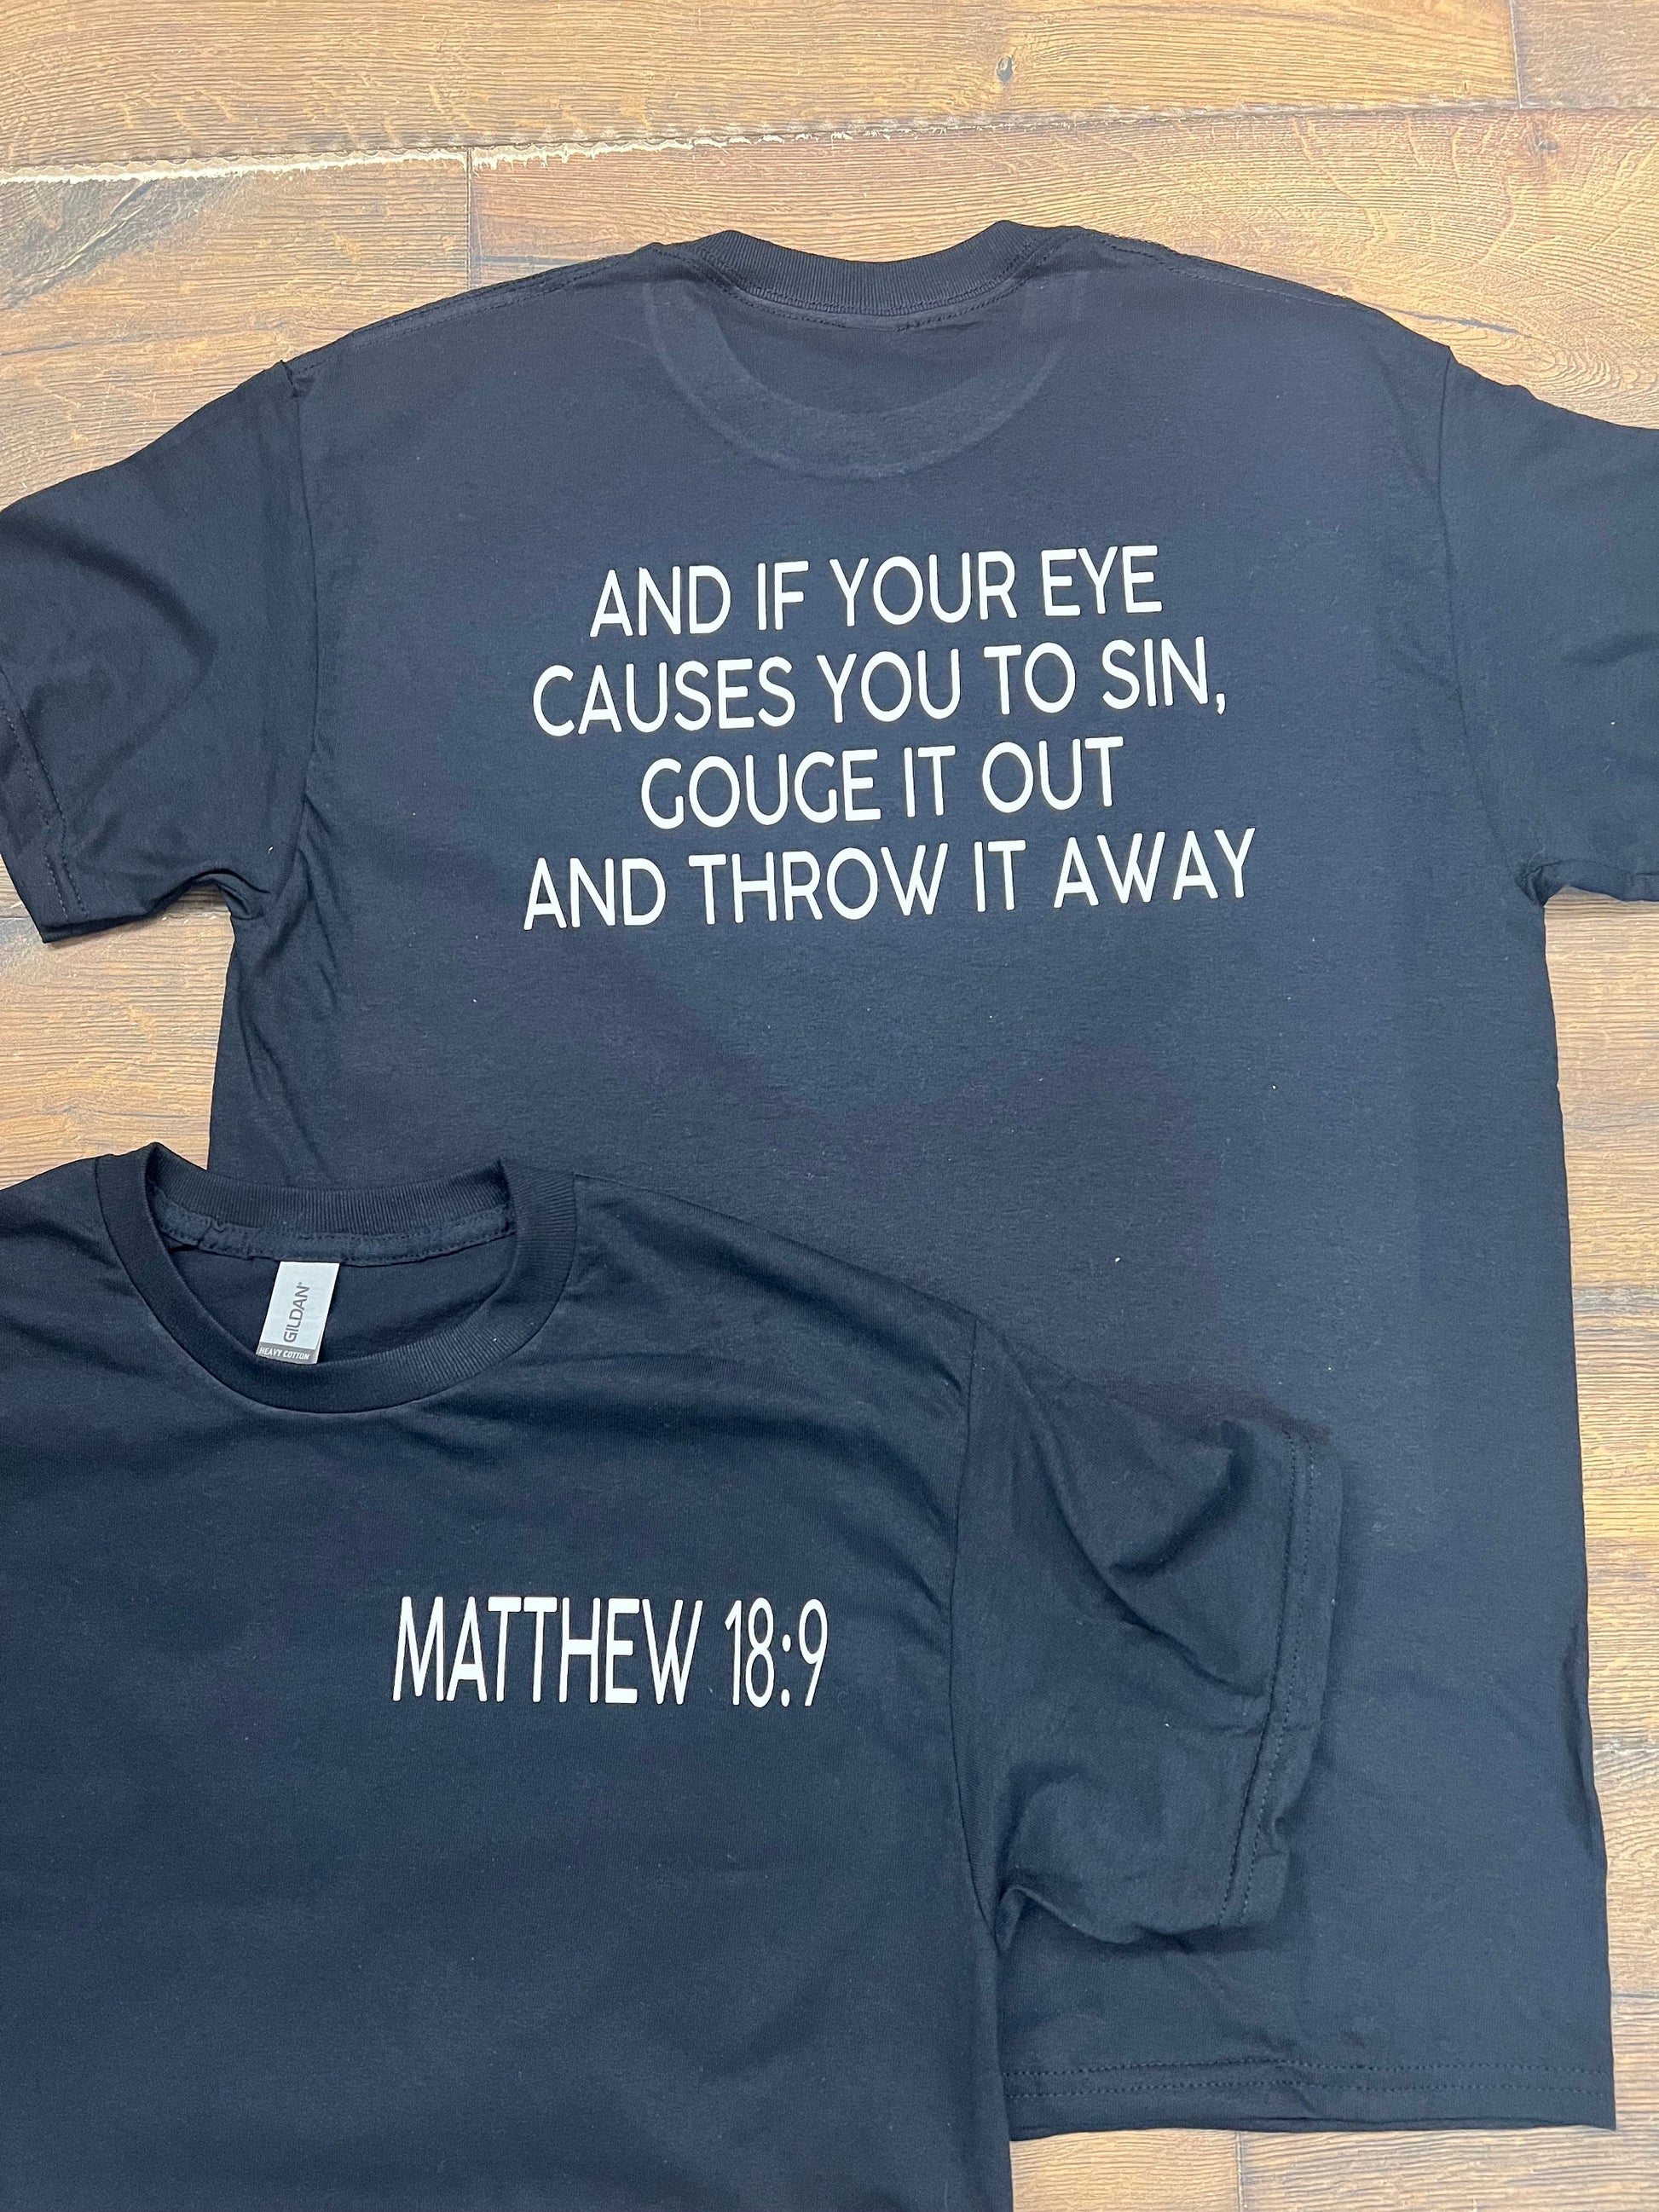 Matthew 18:9 front and back black tee shirt